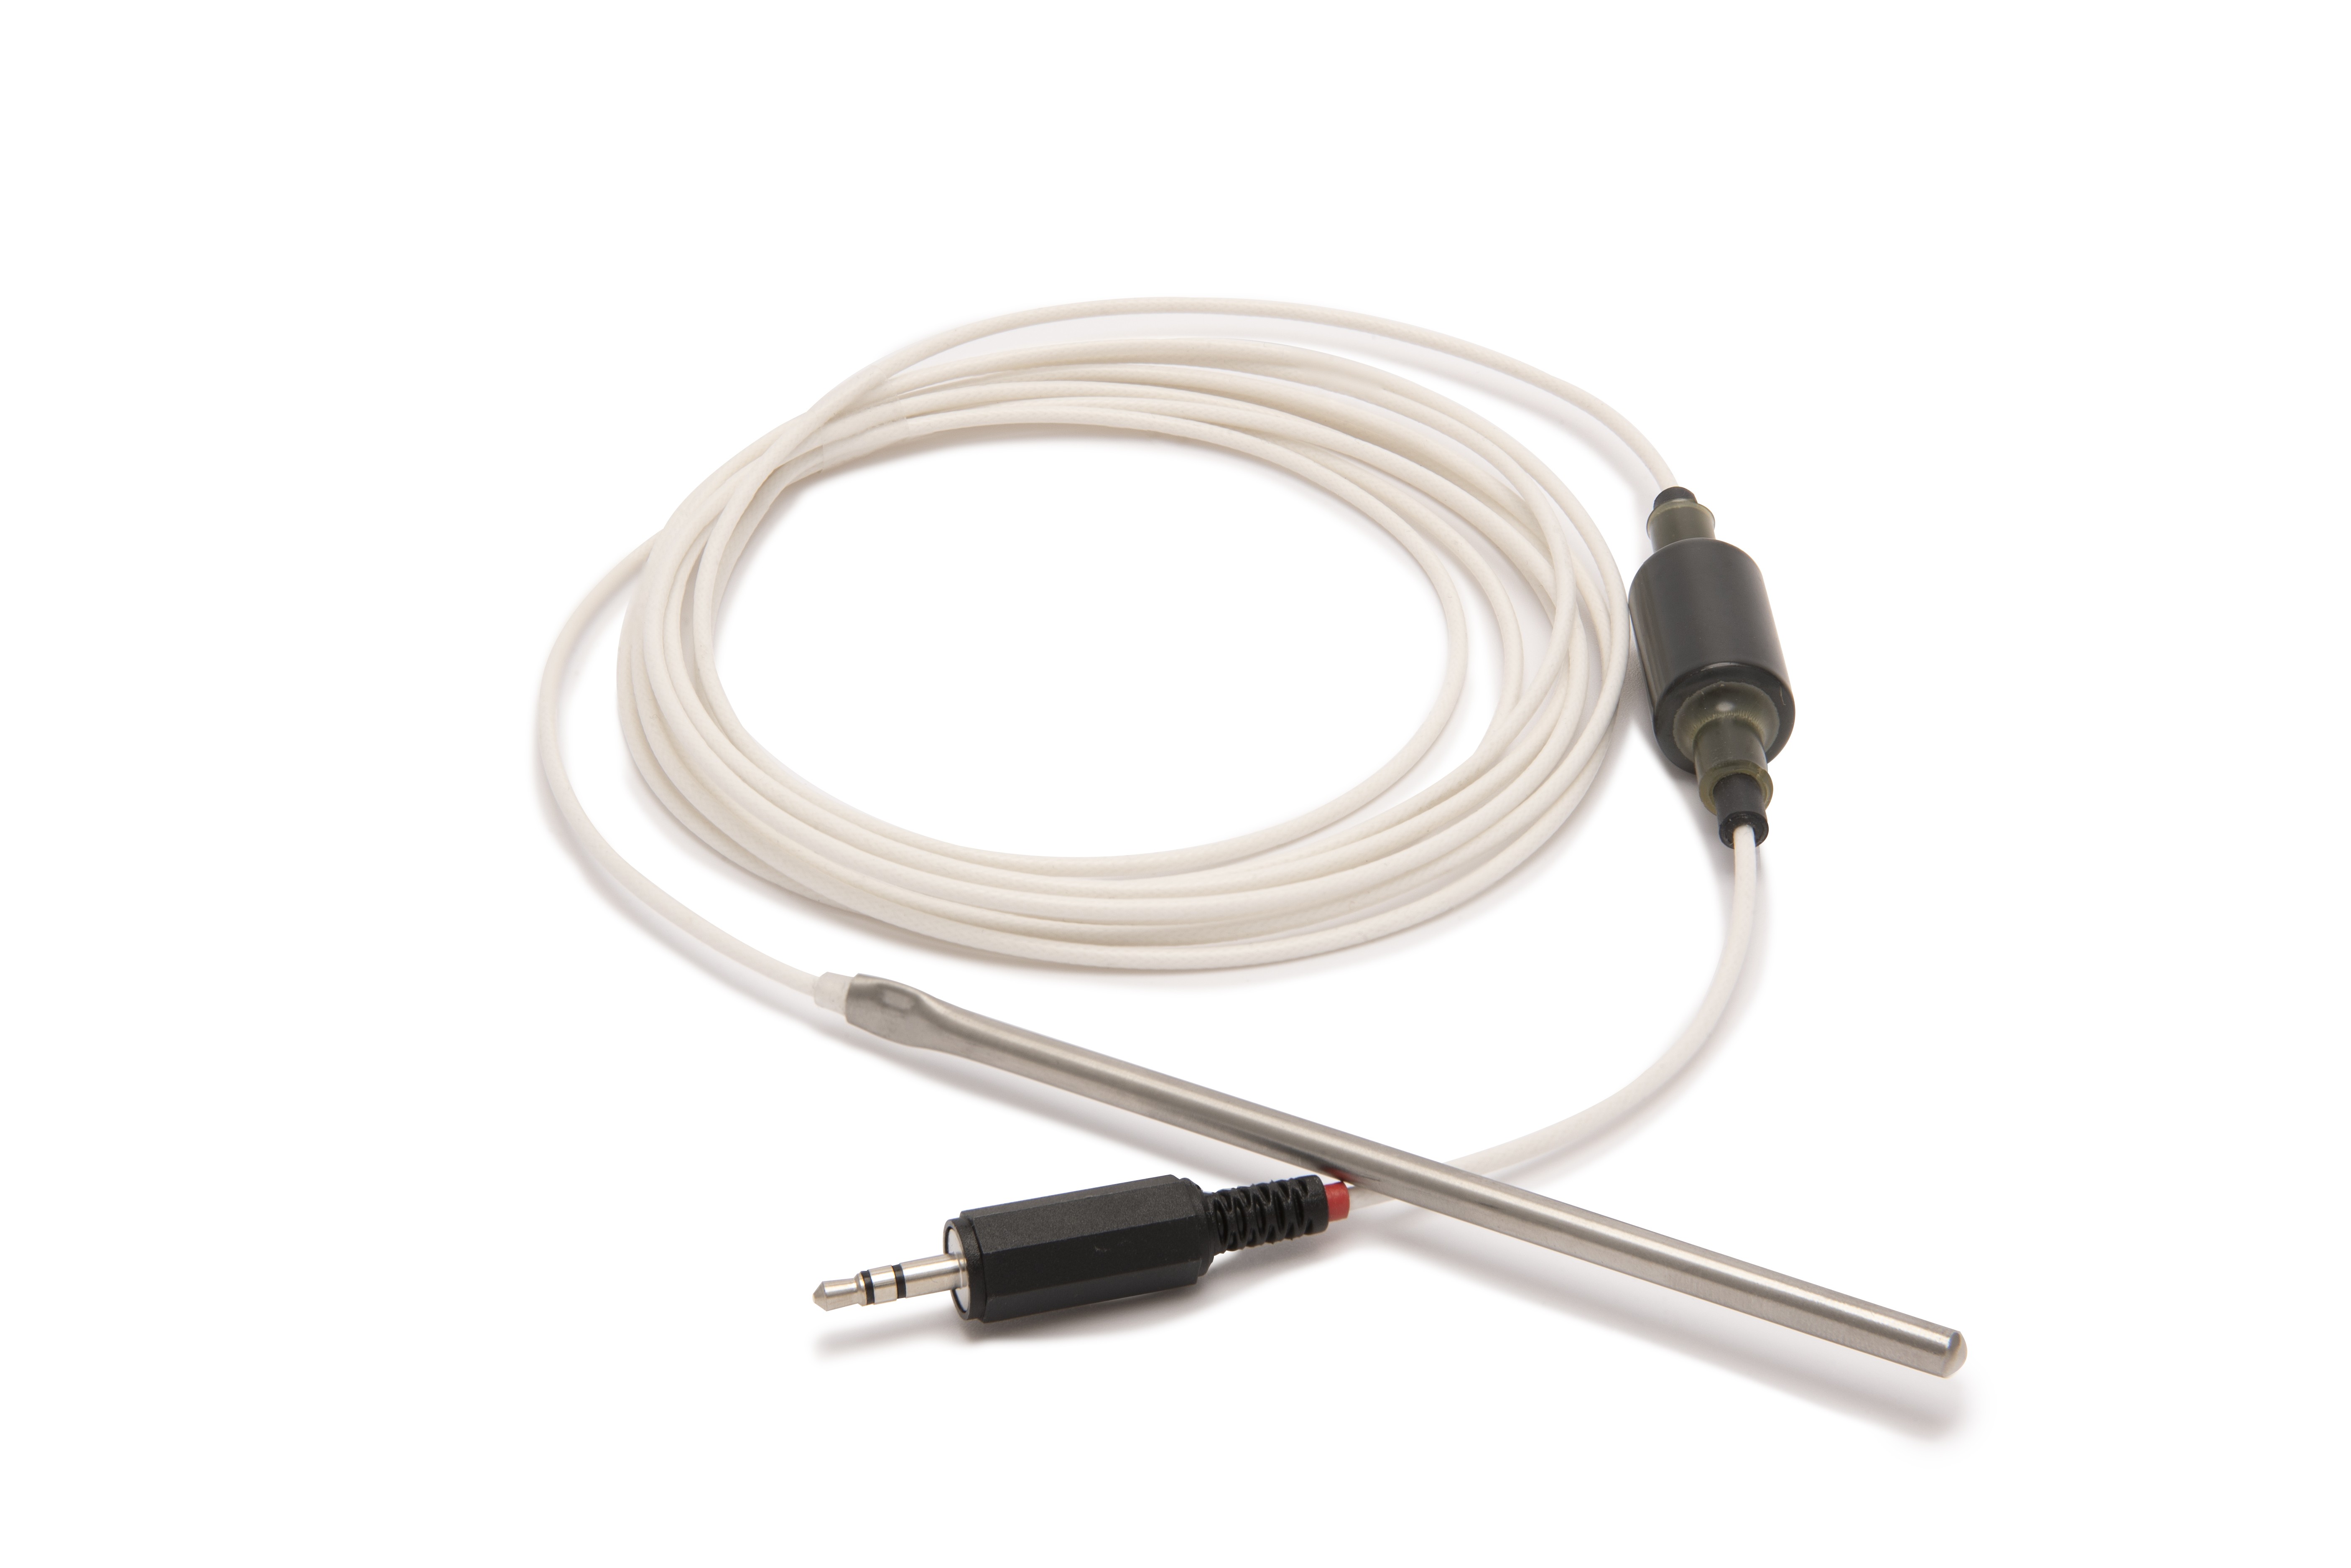 TXSEP - Grant Instruments Flexible External Temperature Probe For Monitoring And Controlling Temperature Of Remote Loads